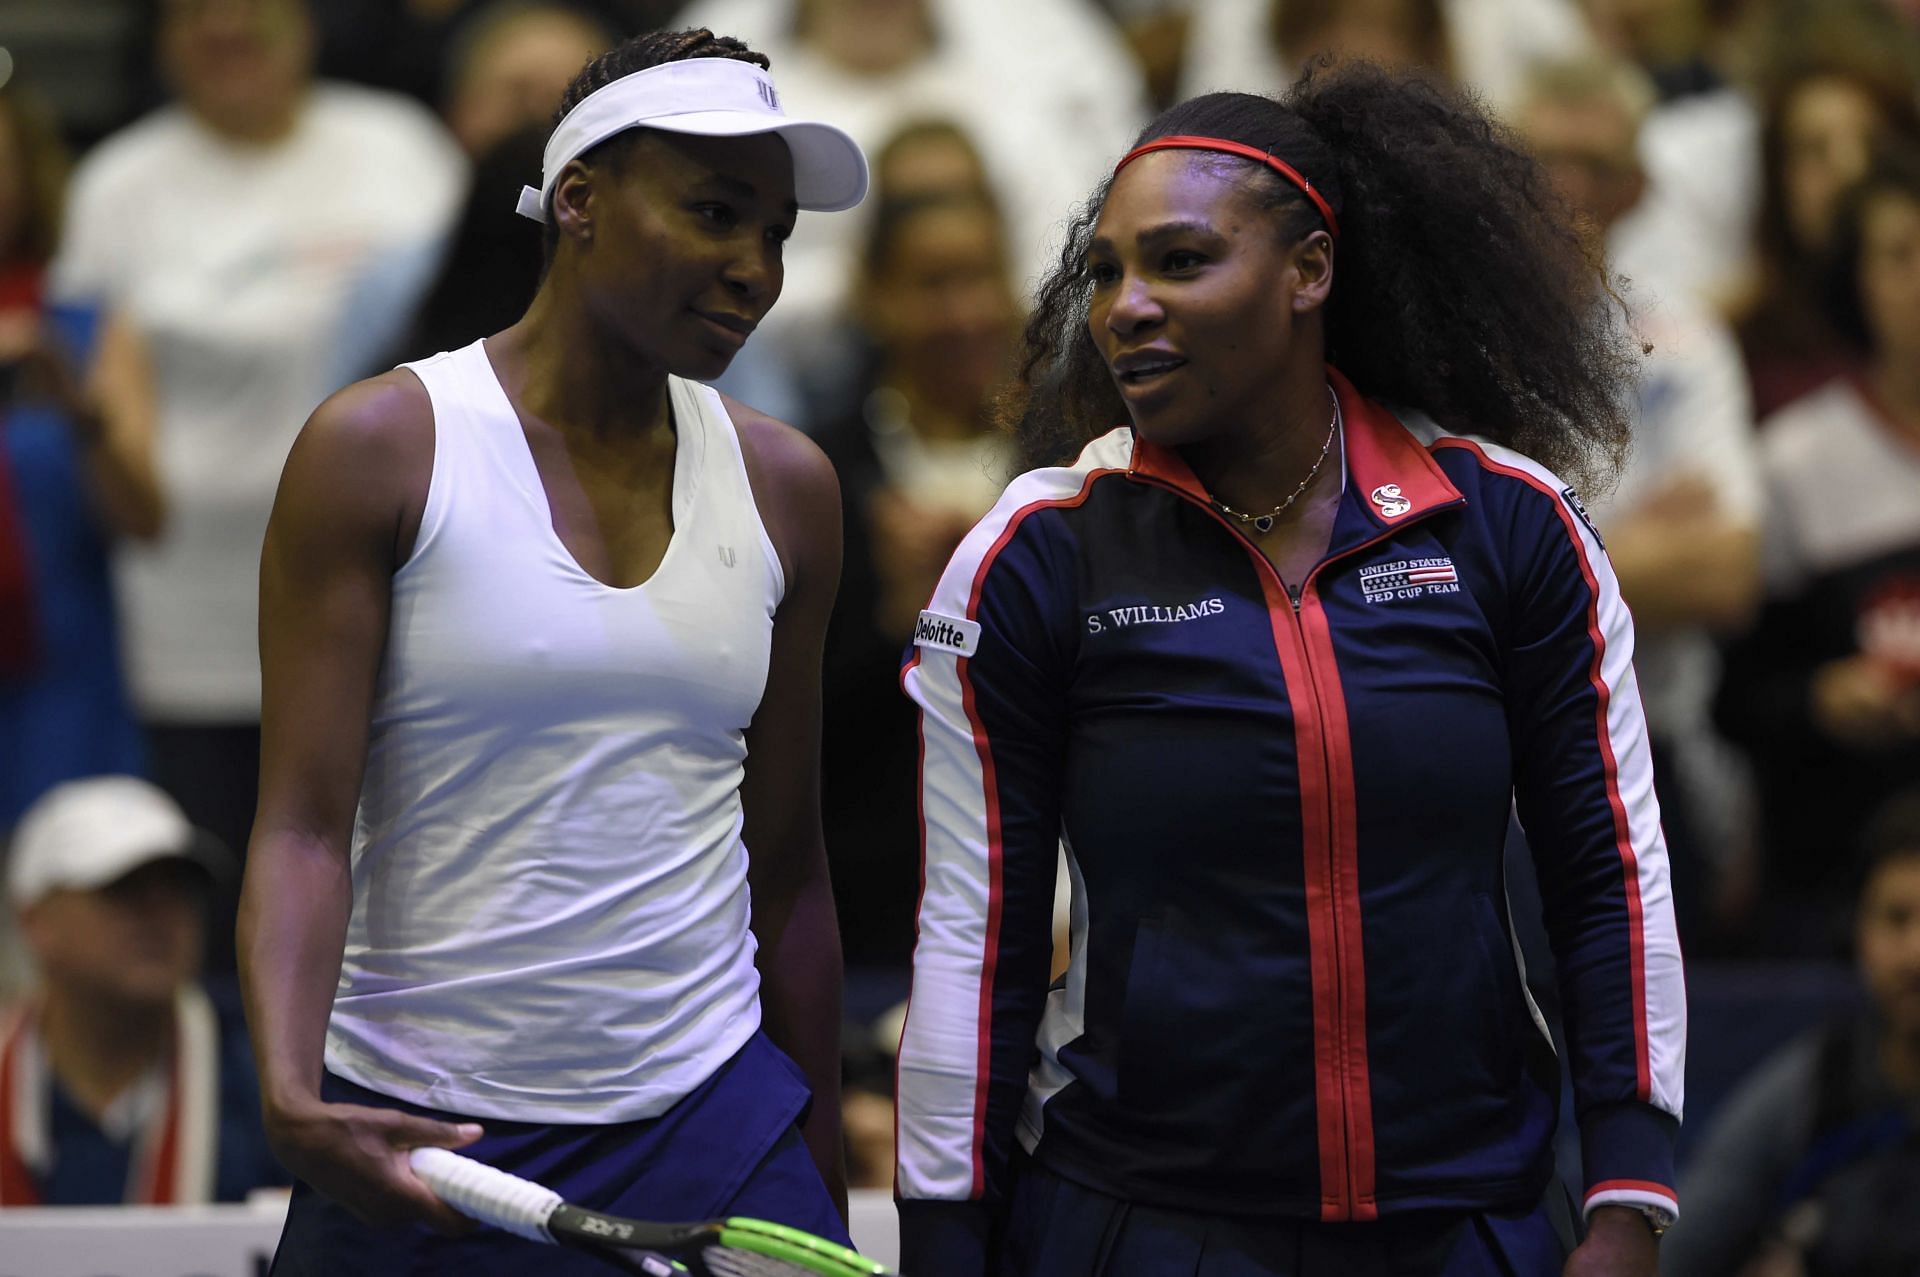 Venus Williams has won all 22 of her doubles titles alongside her sister Serena Williams